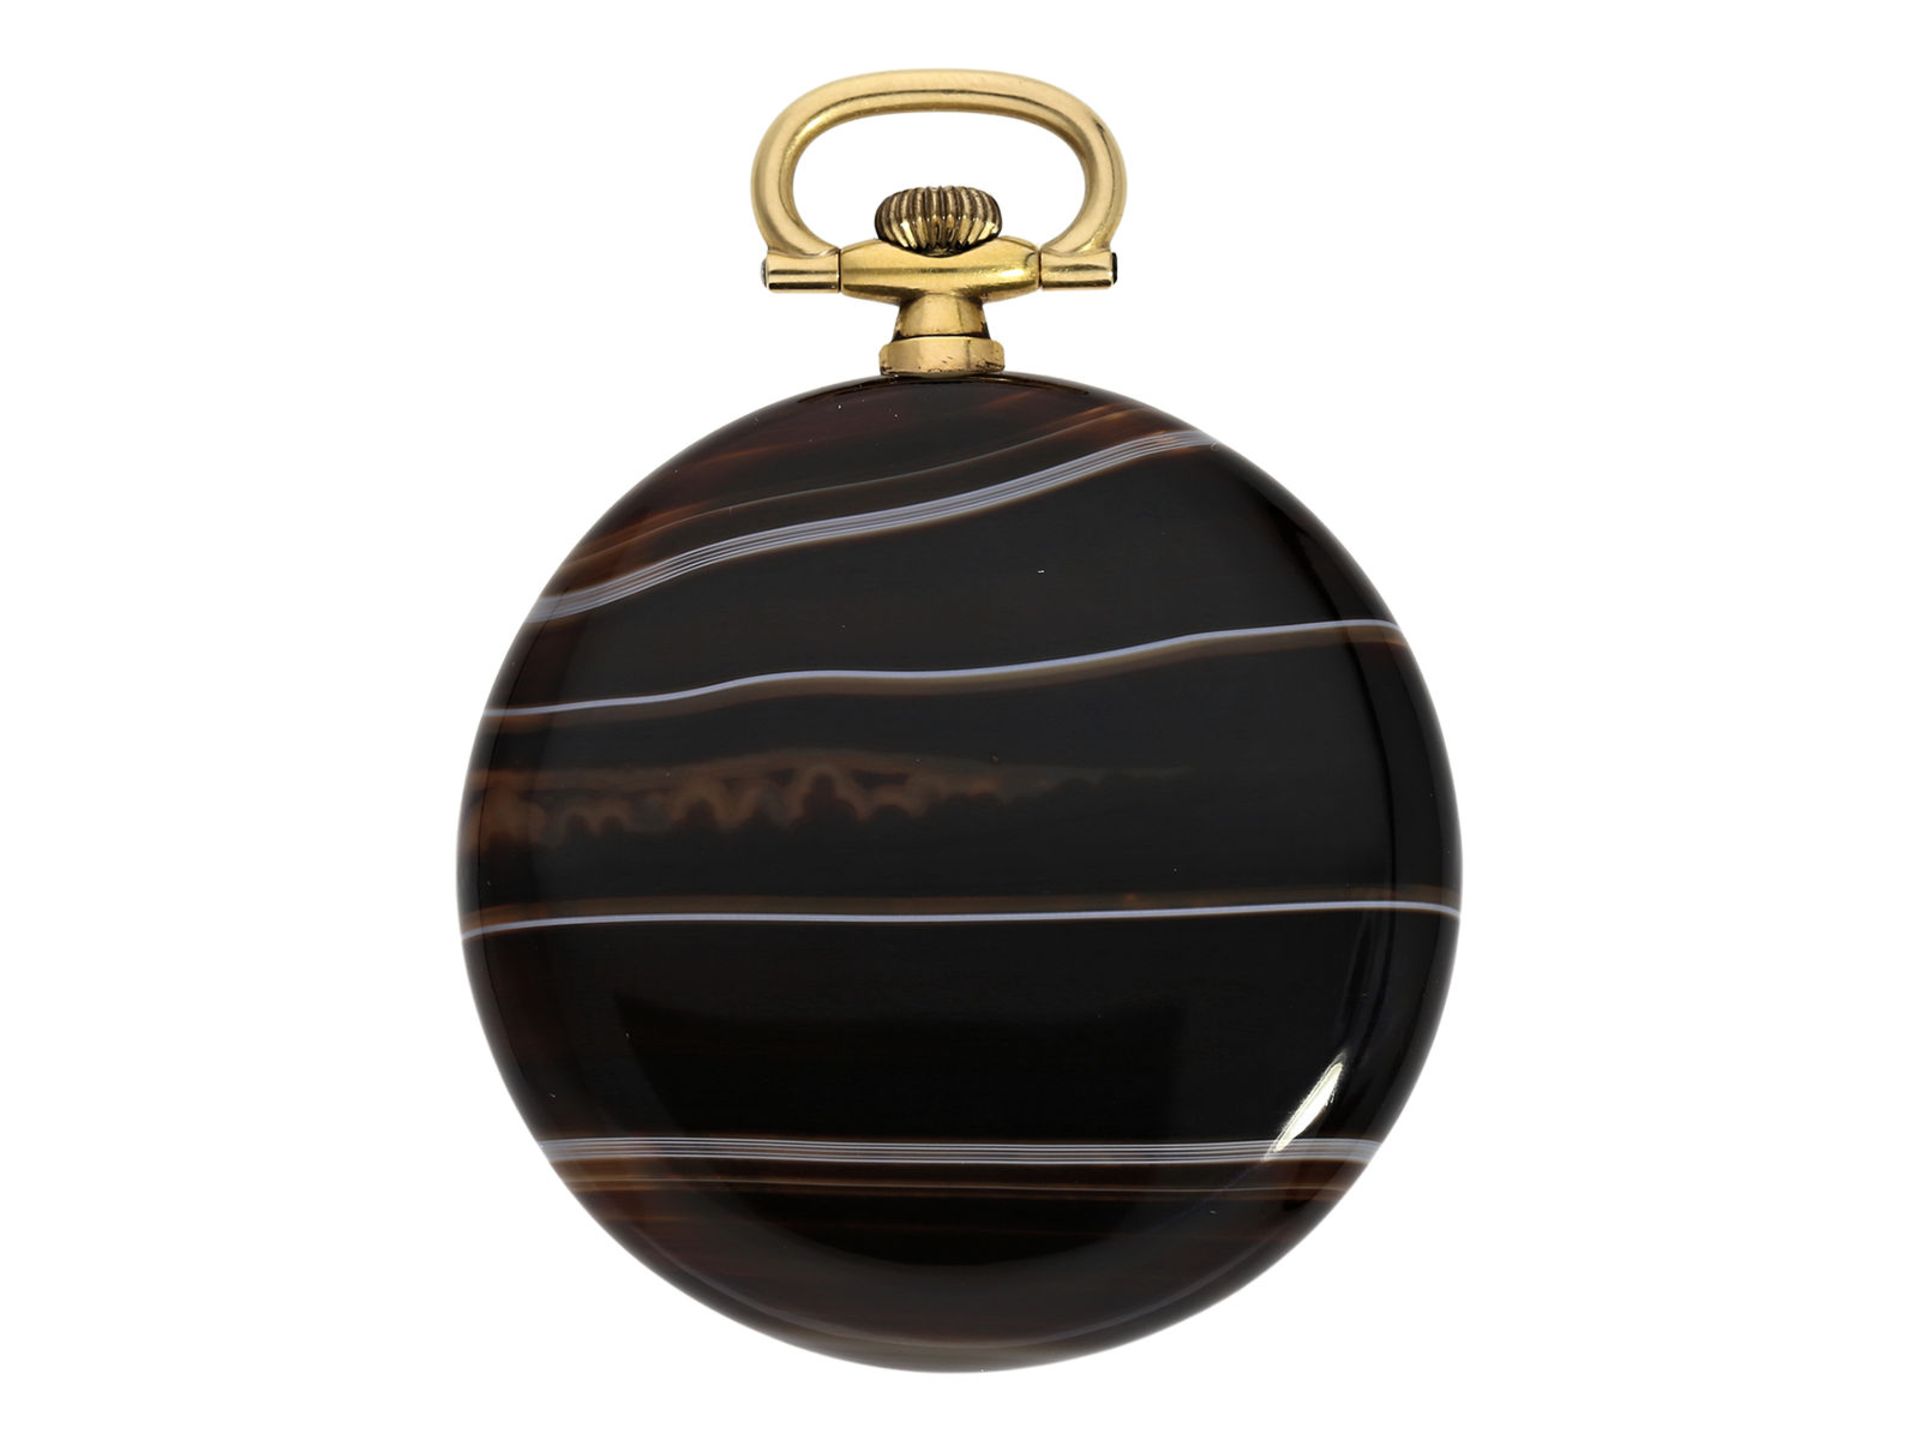 Pocket watch: Art déco dress watch in rare agate gold case, ca. 1925 - Image 3 of 3